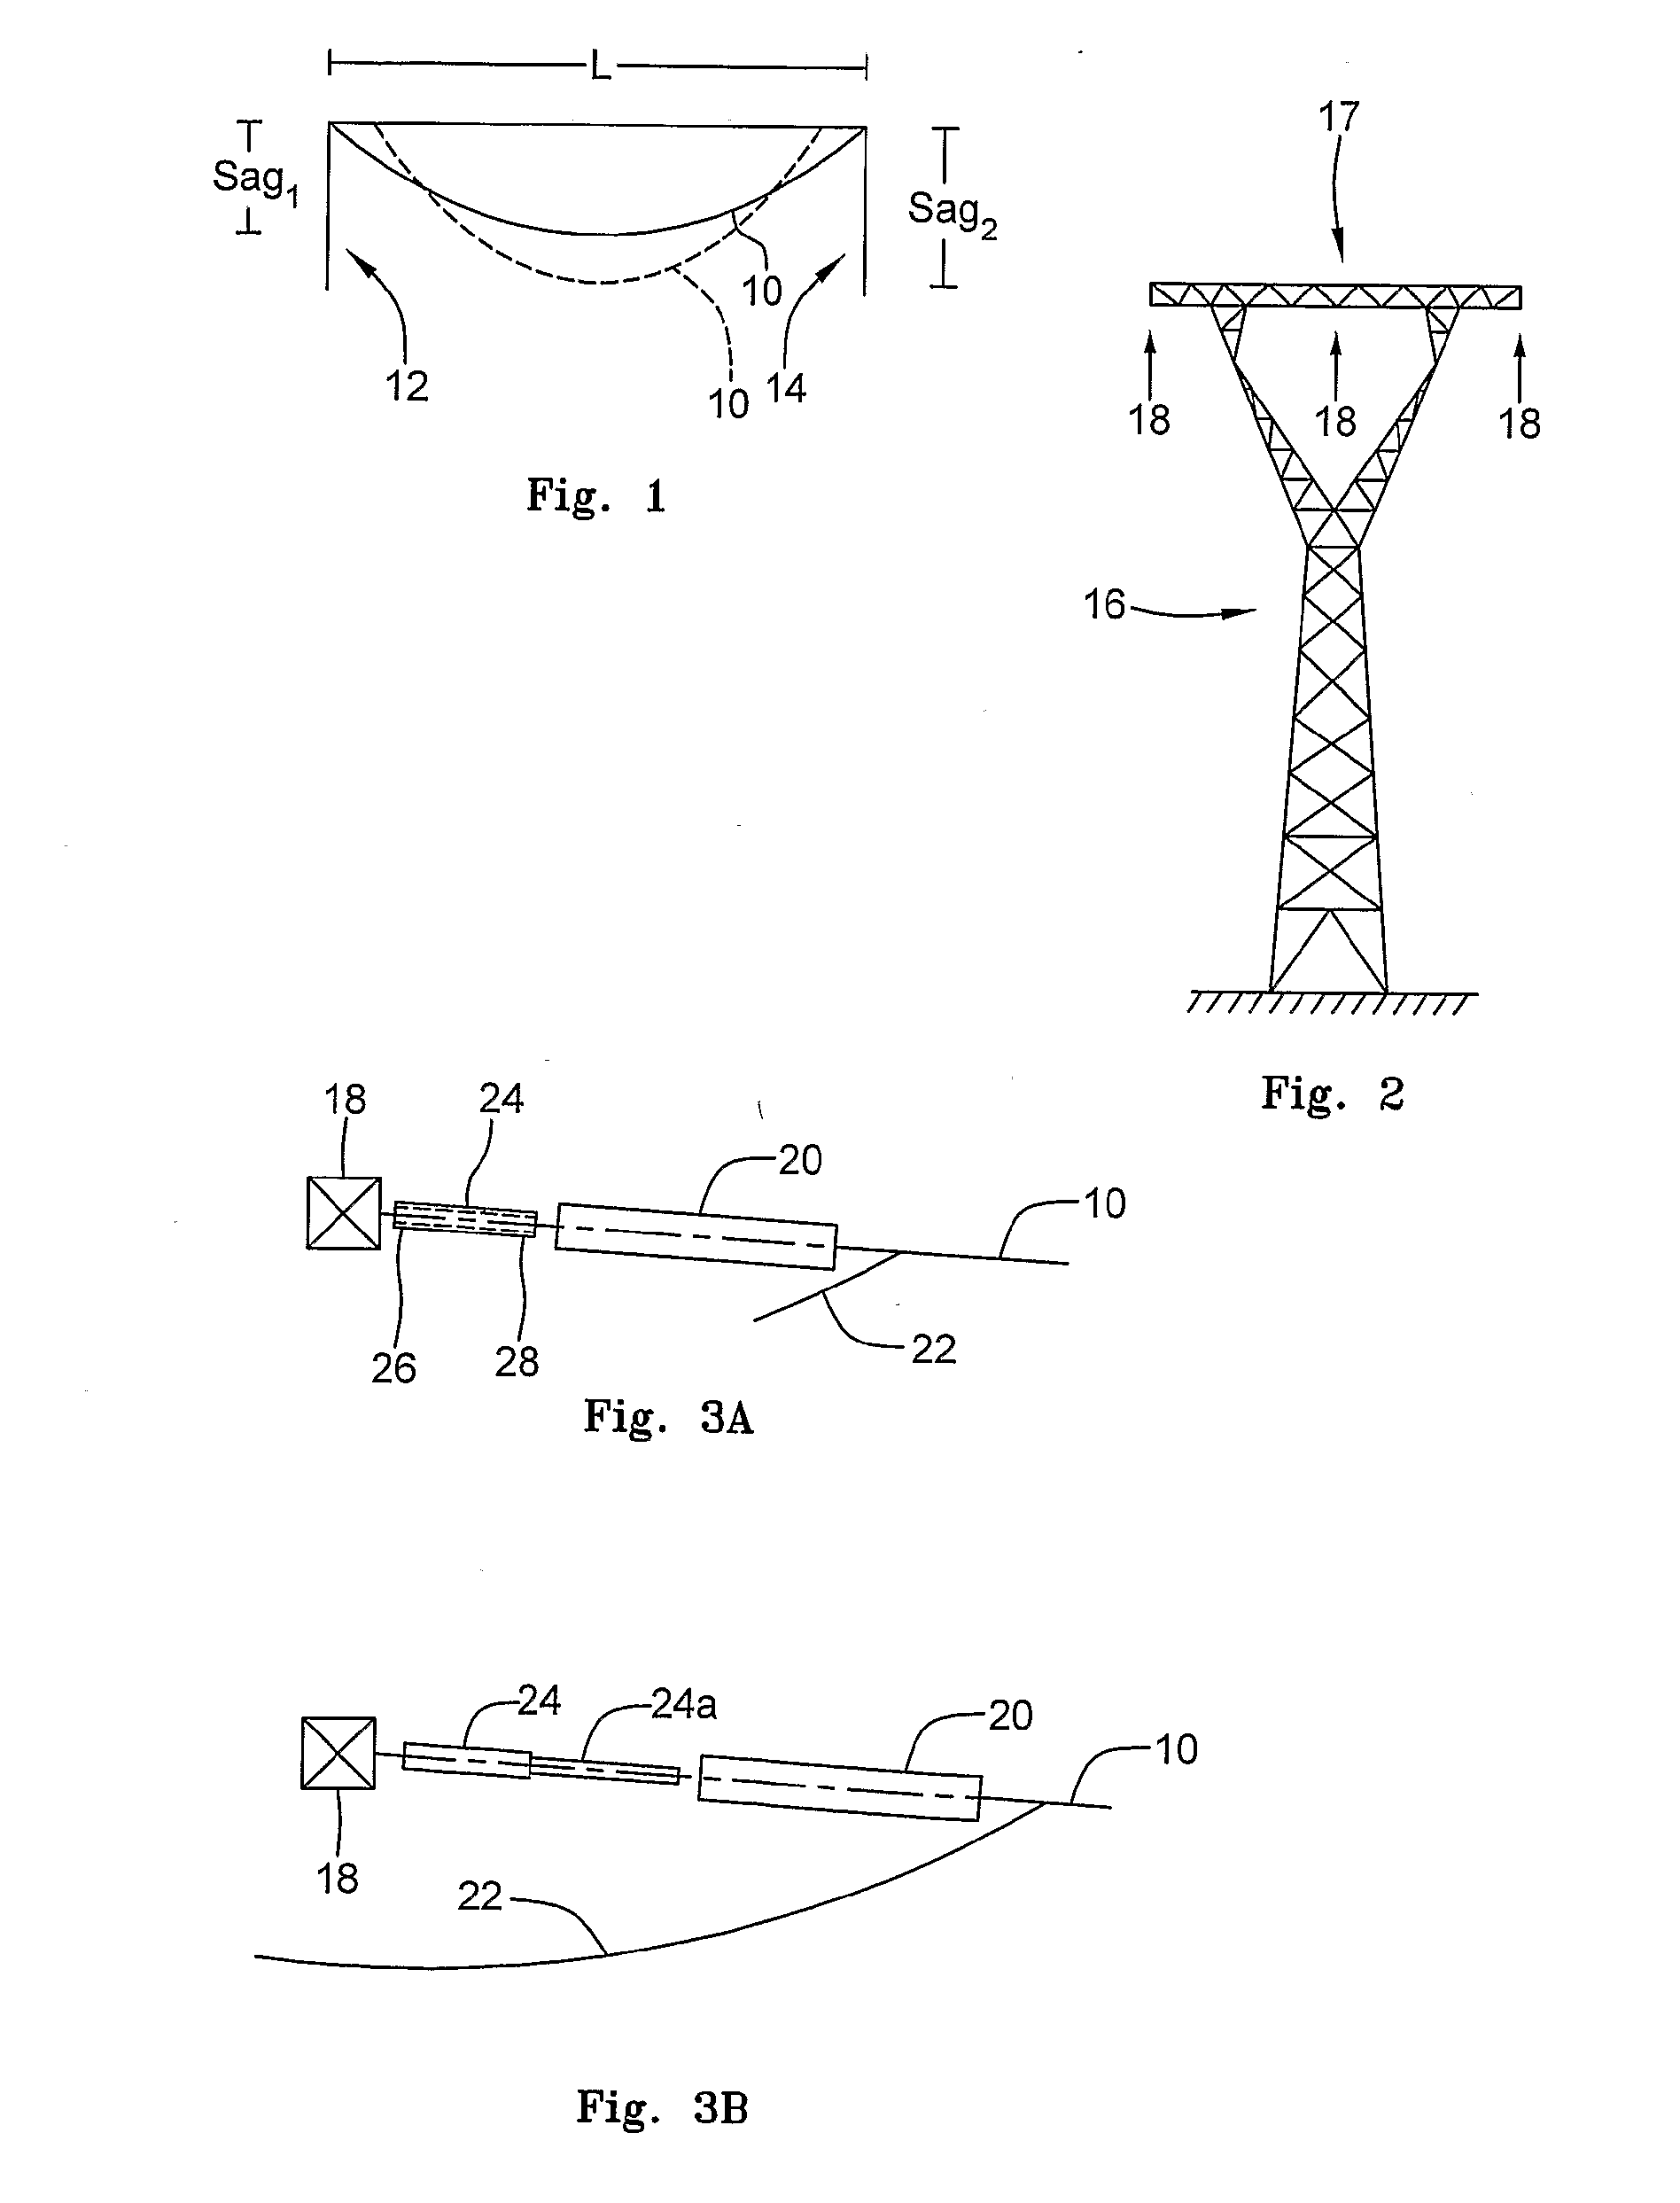 Systems and Methods For Stabilizing Cables Under Heavy Loading Conditions